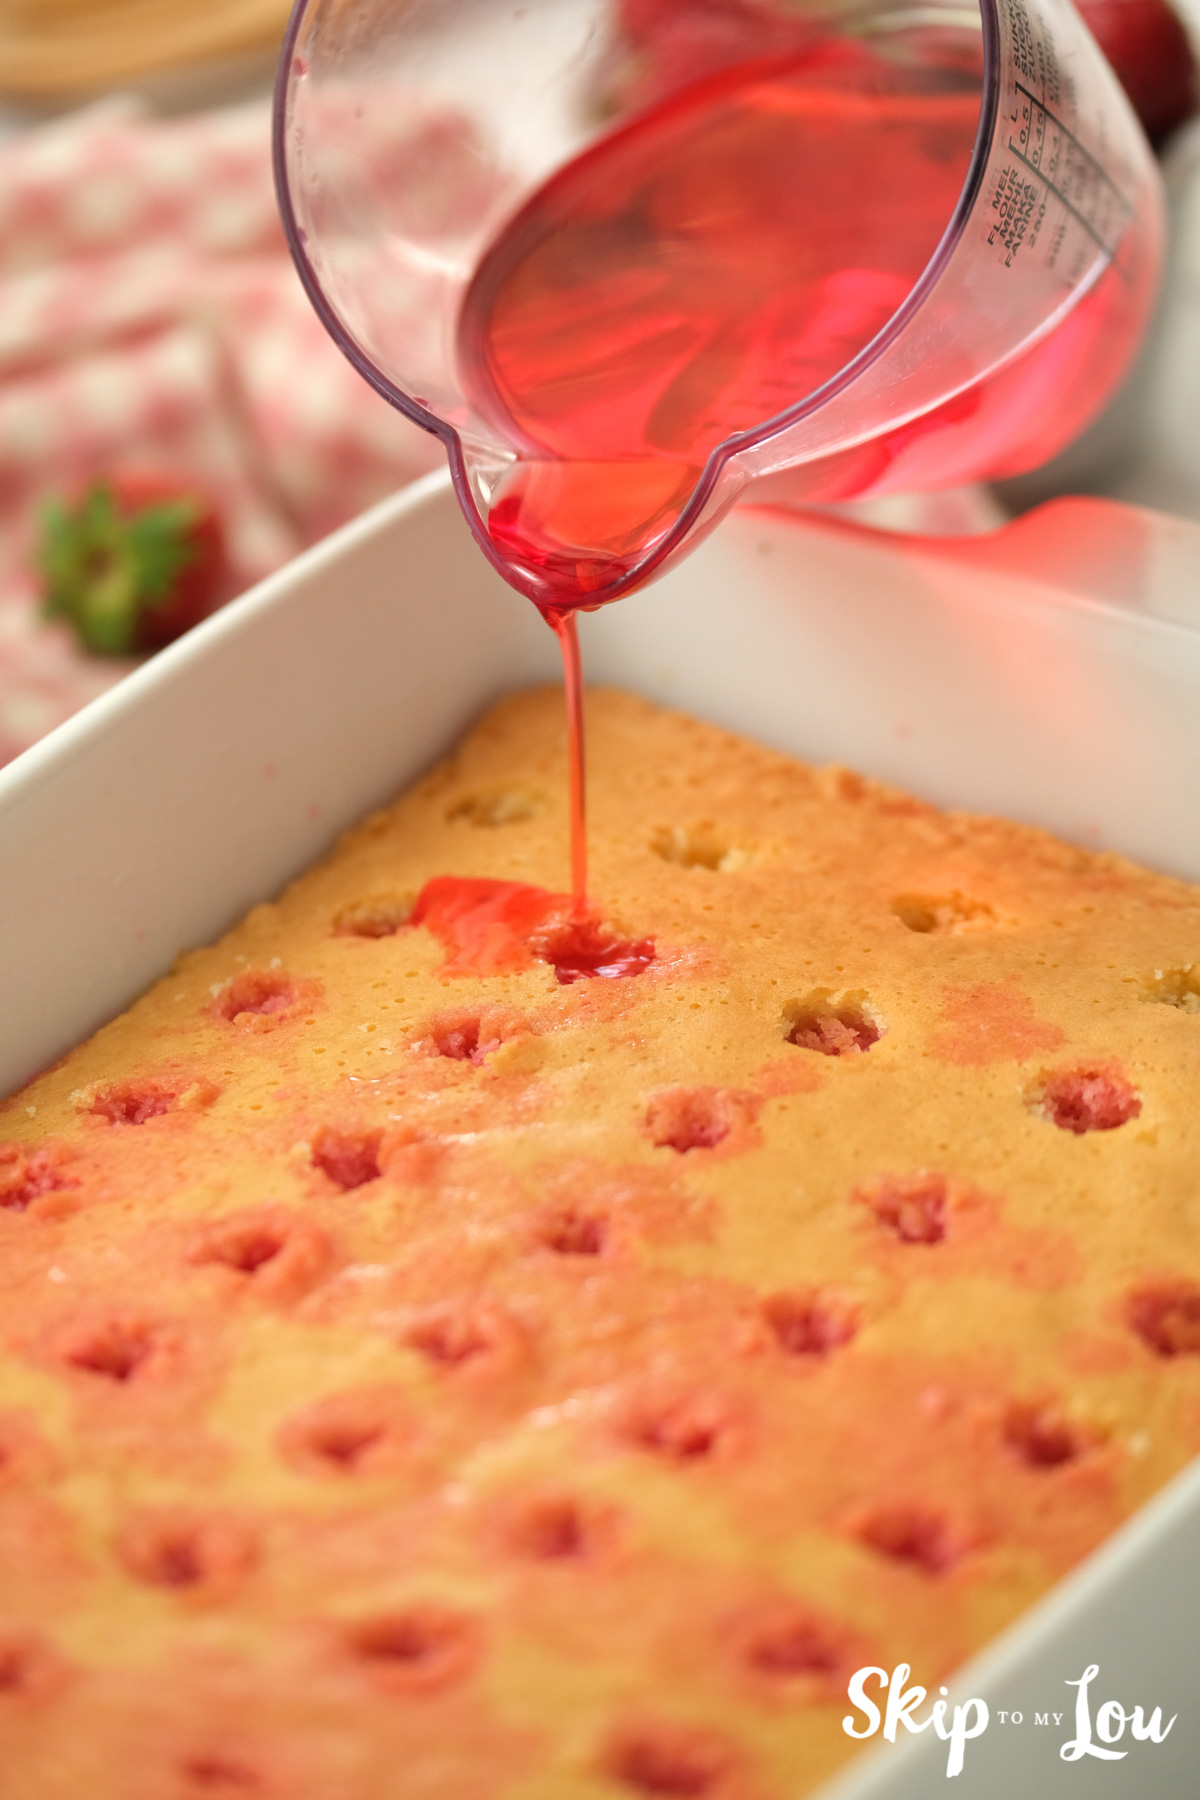 Liquid strawberry jello being poured into the holes on top of a baked cake, by Skip to my Lou.